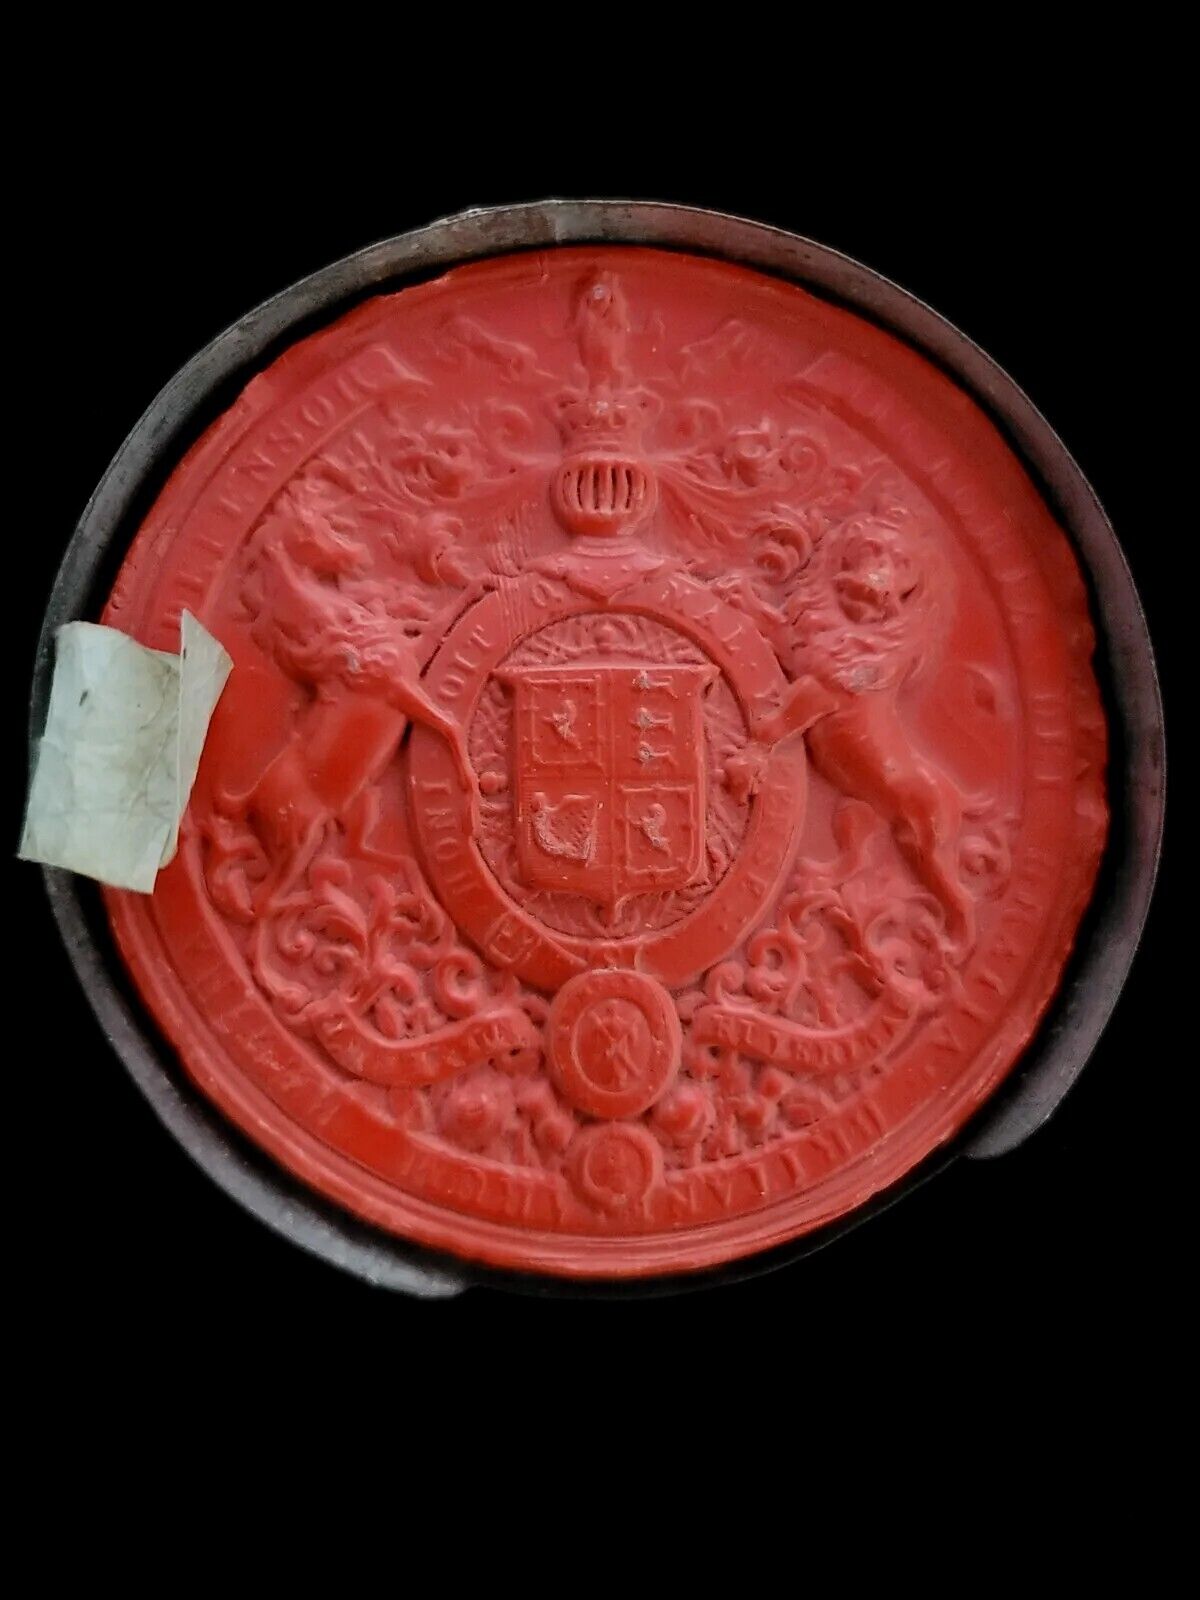 Queen Victoria Royal Wax Great Seal of Scotland Realm British Royalty Document